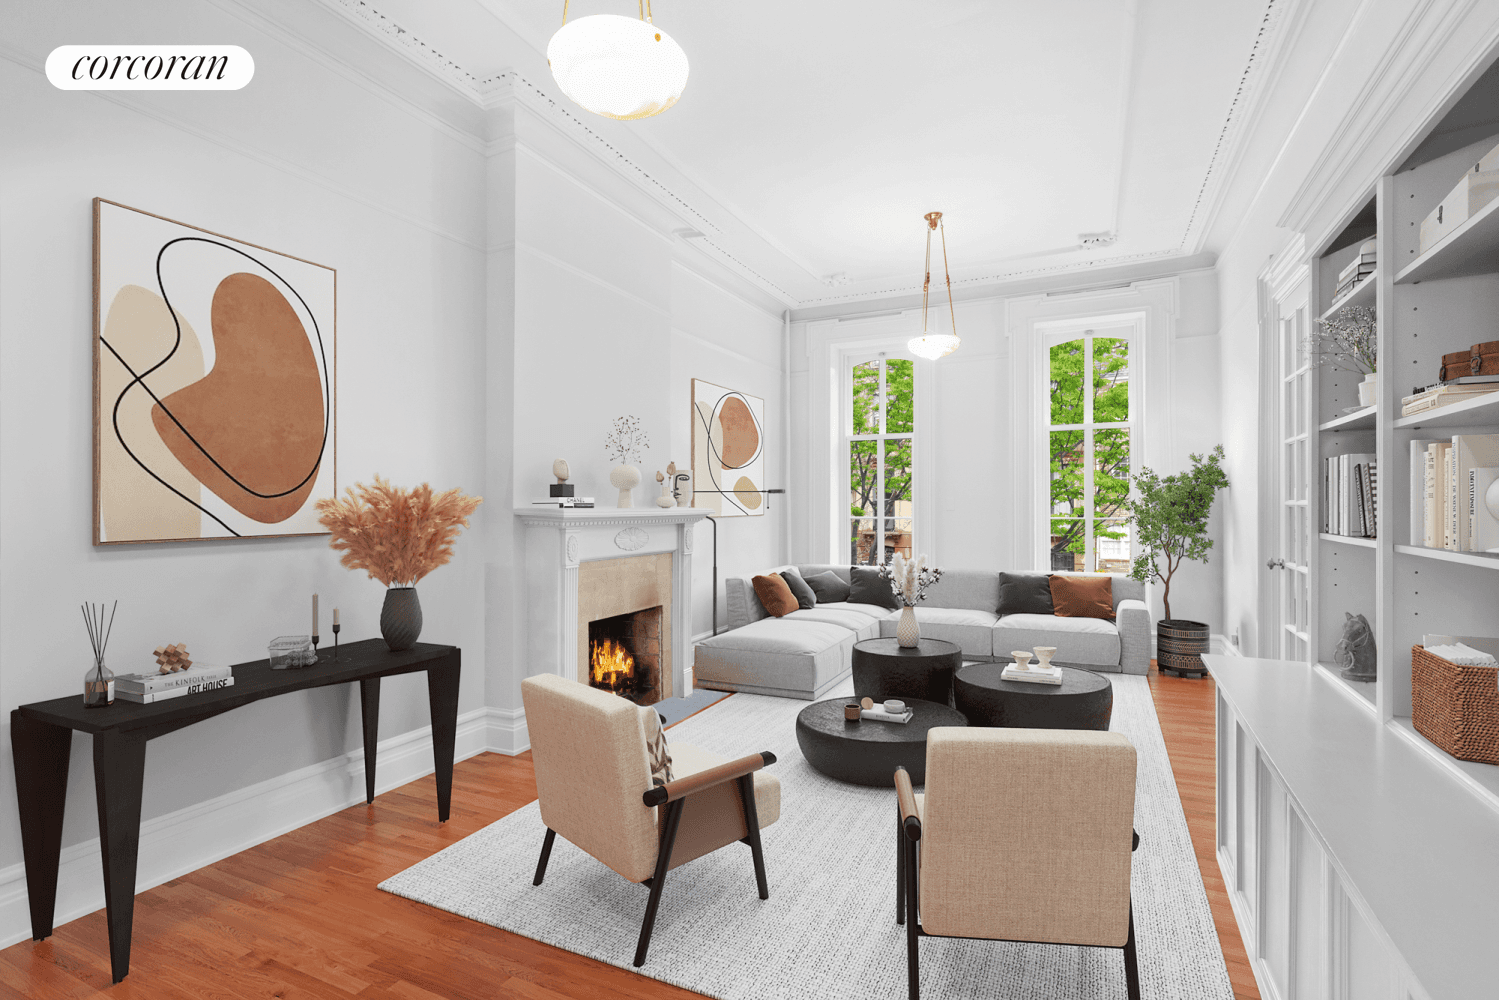 Welcome to 46 Tompkins Place, a stunning four bed, four and a half bath townhouse located in the heart of Cobble Hill, Brooklyn.